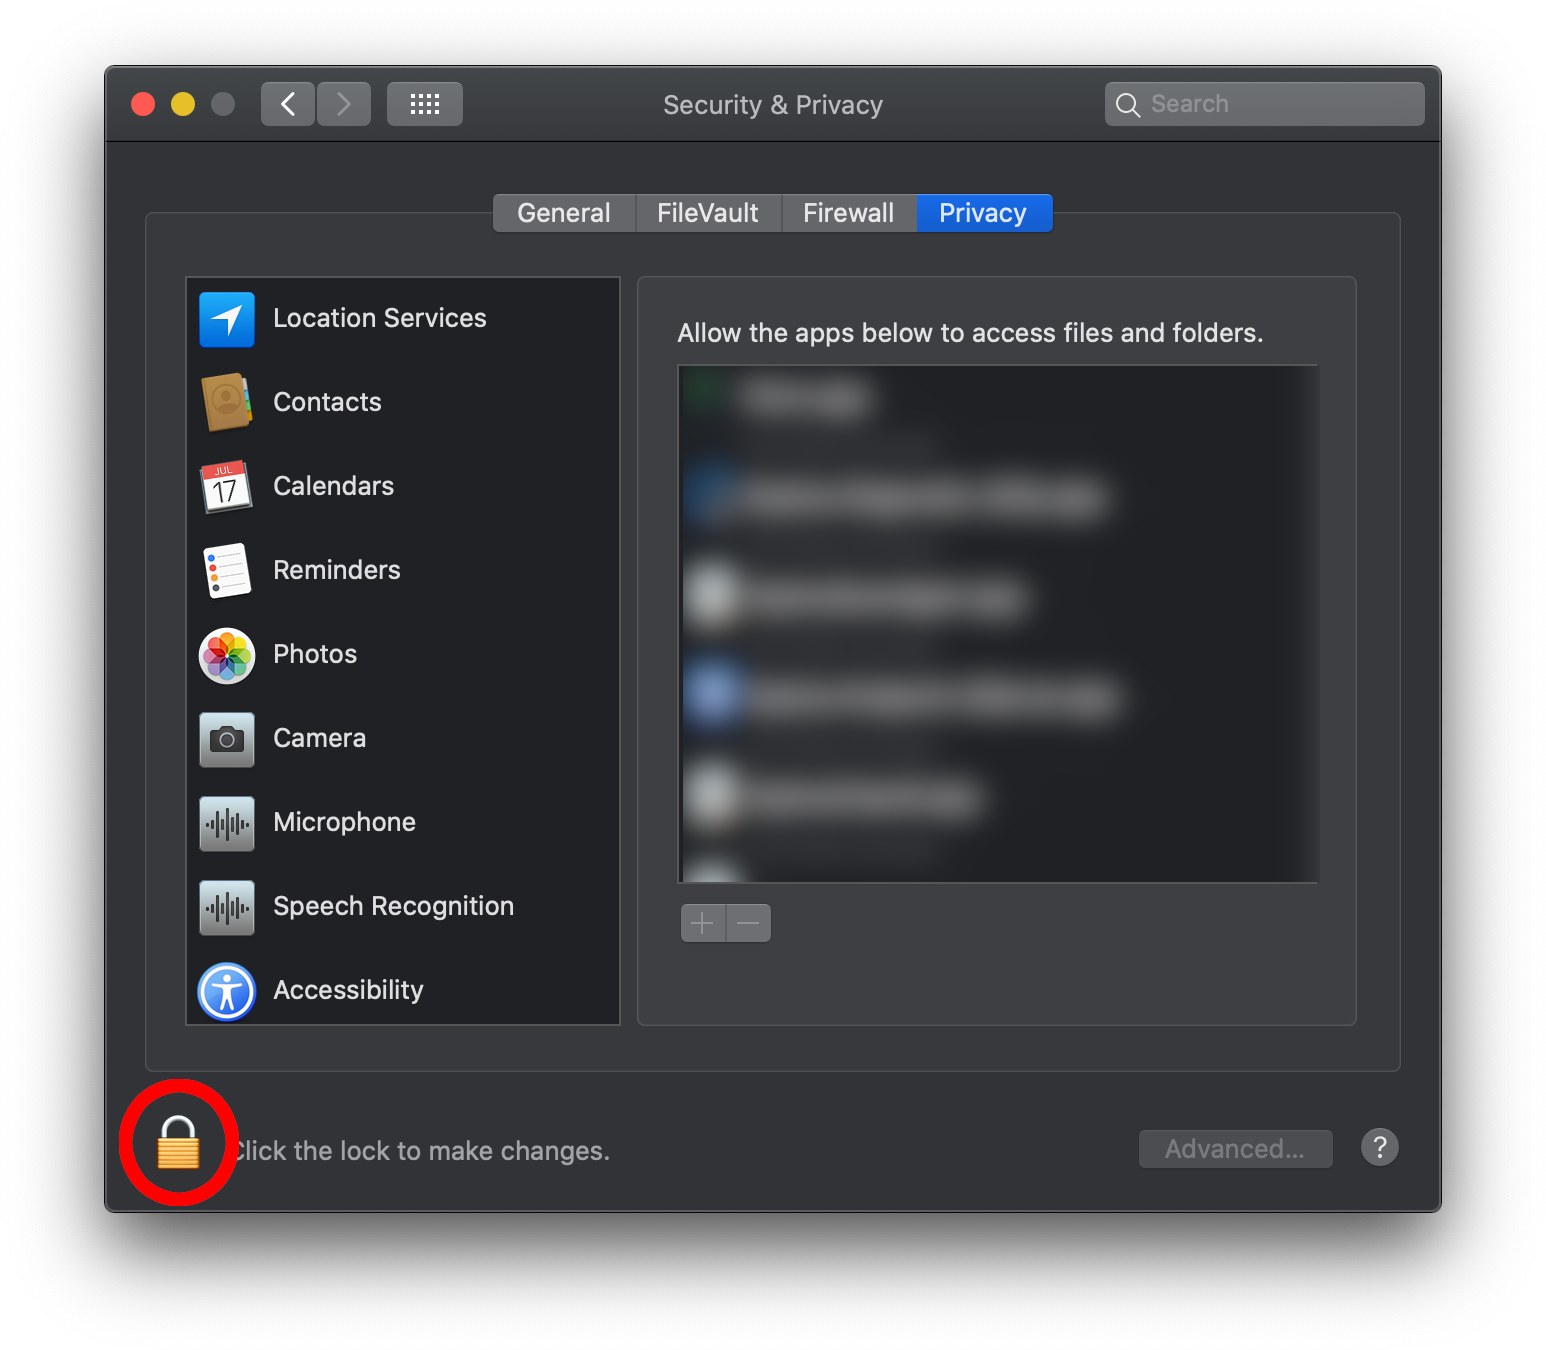 The Security & Privacy config window from macOS. A red circle highlights the lock symbol in the bottom left corner.